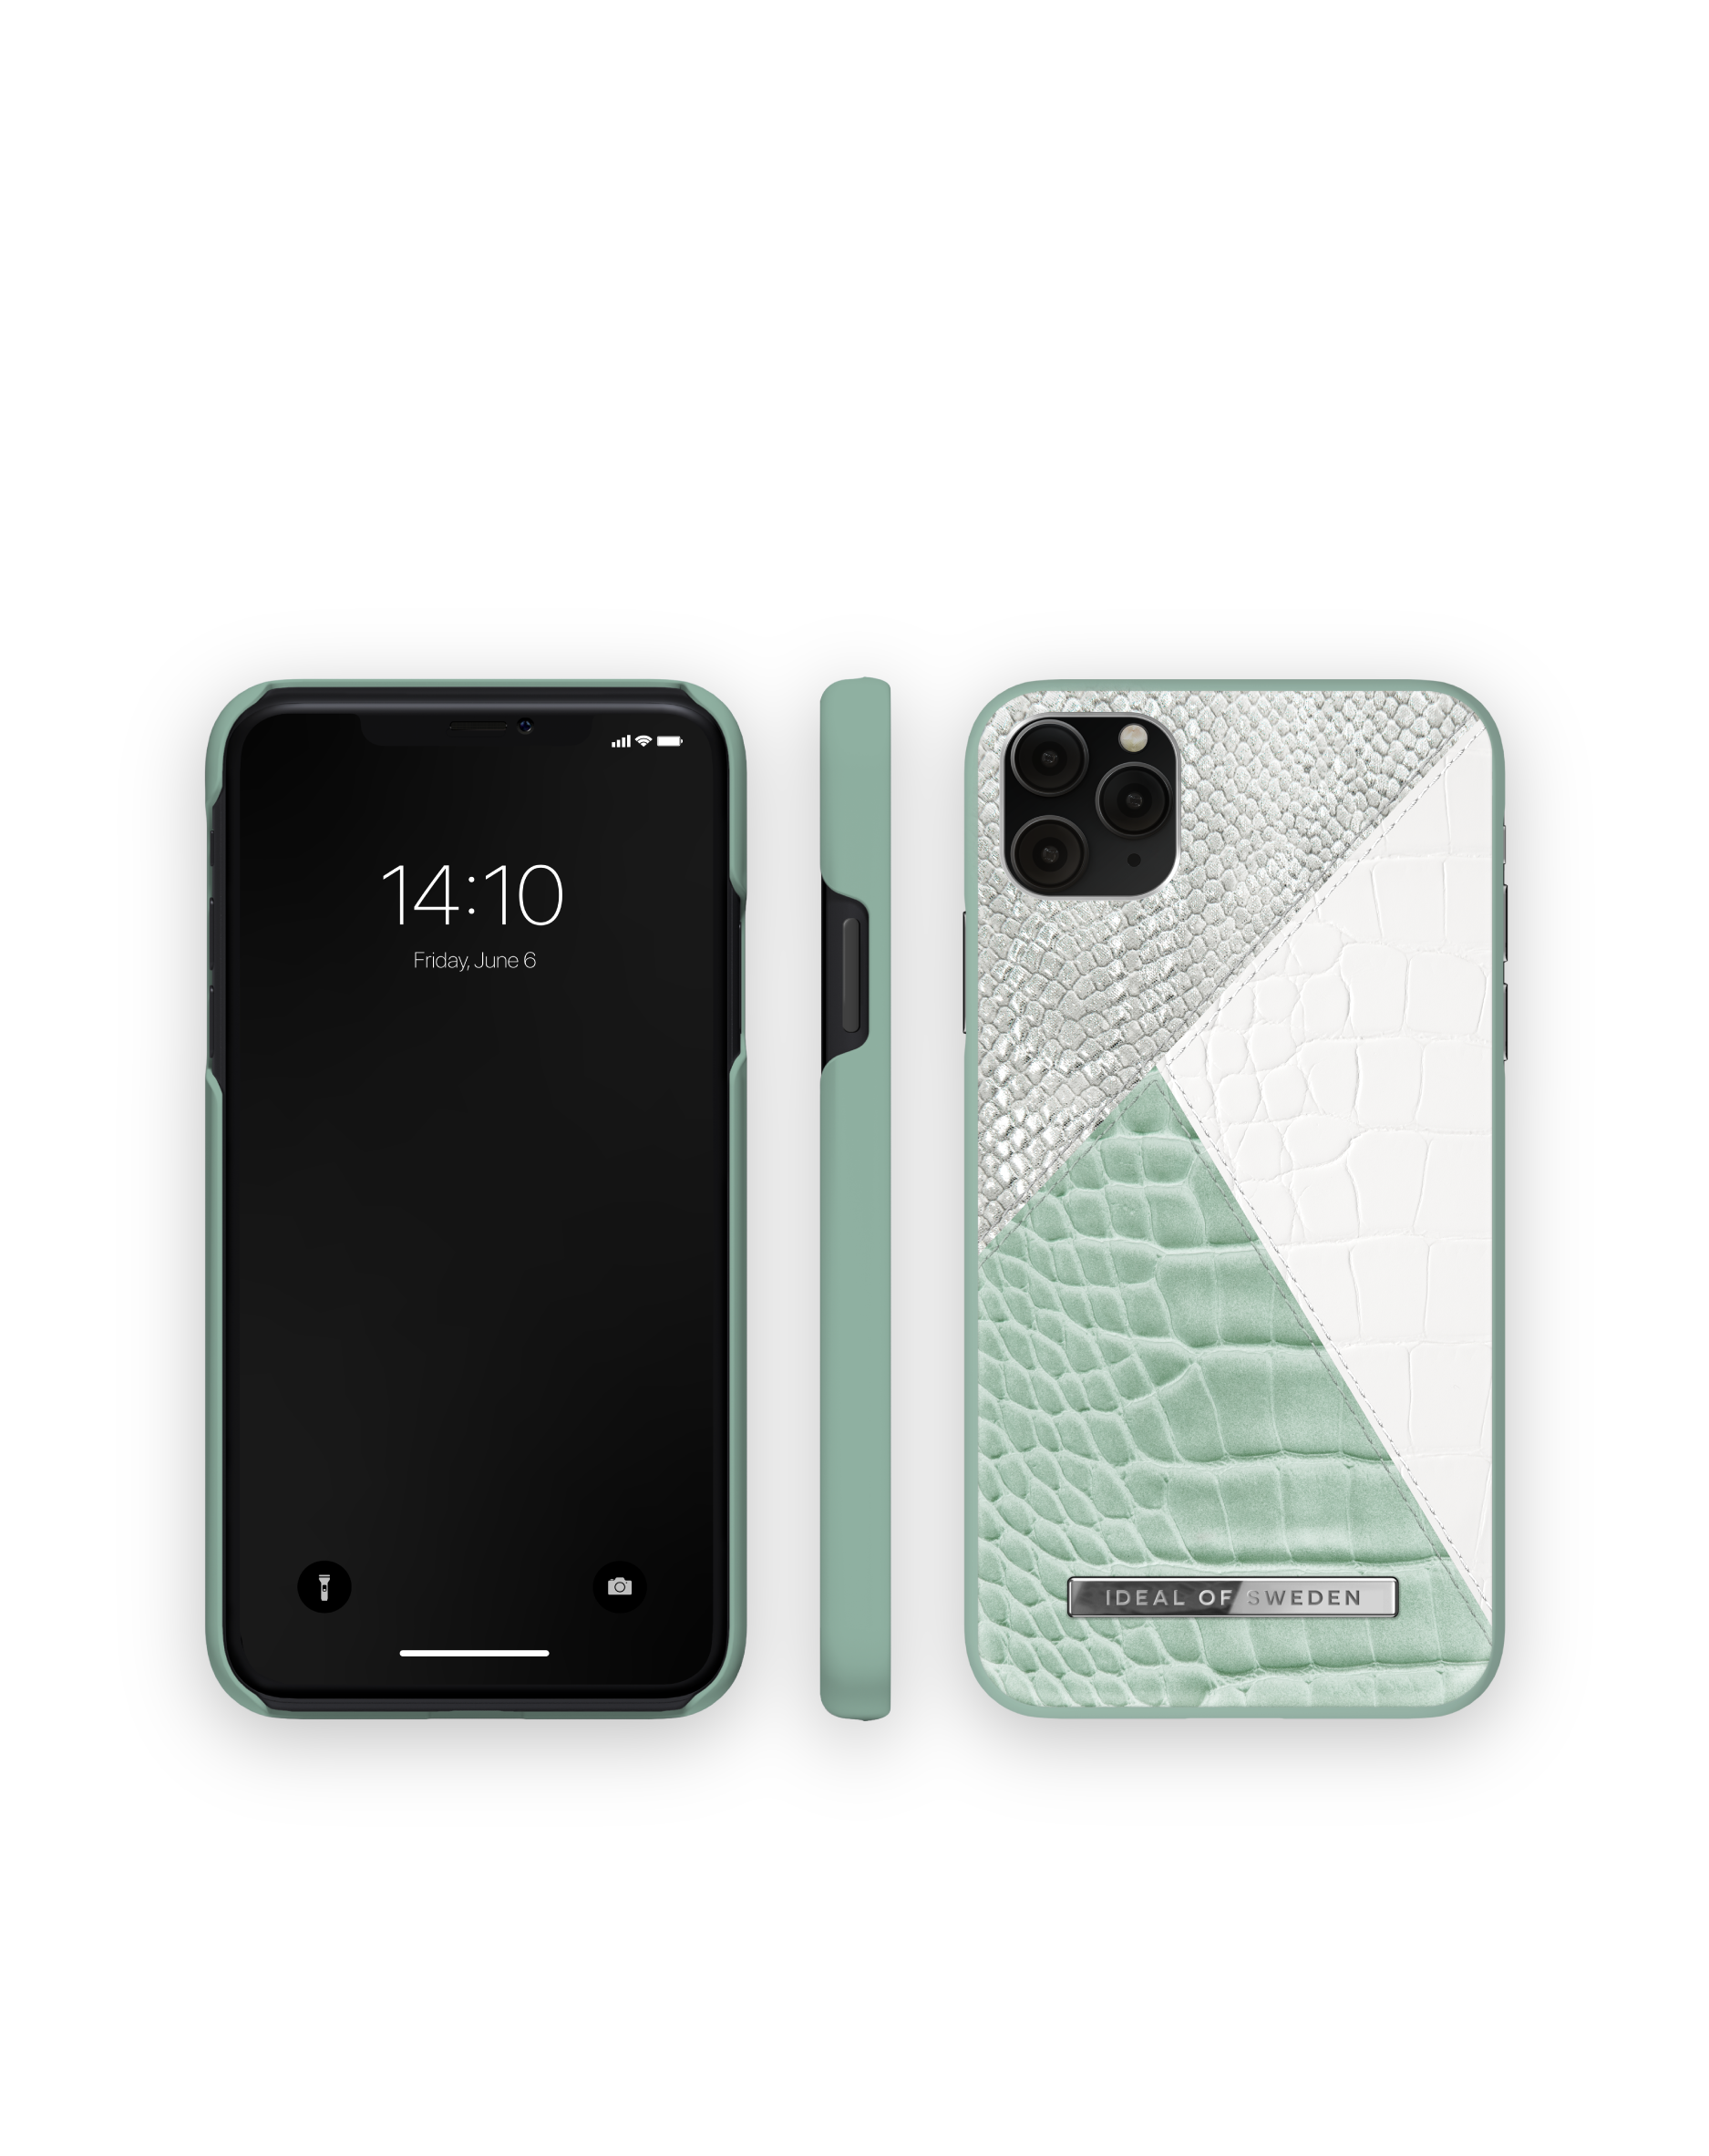 Backcover, SWEDEN Snake iPhone 11 Pro XS Apple Apple IDACSS21-I1965-268, OF IDEAL iPhone Apple, Mint Max, Max, Palladian